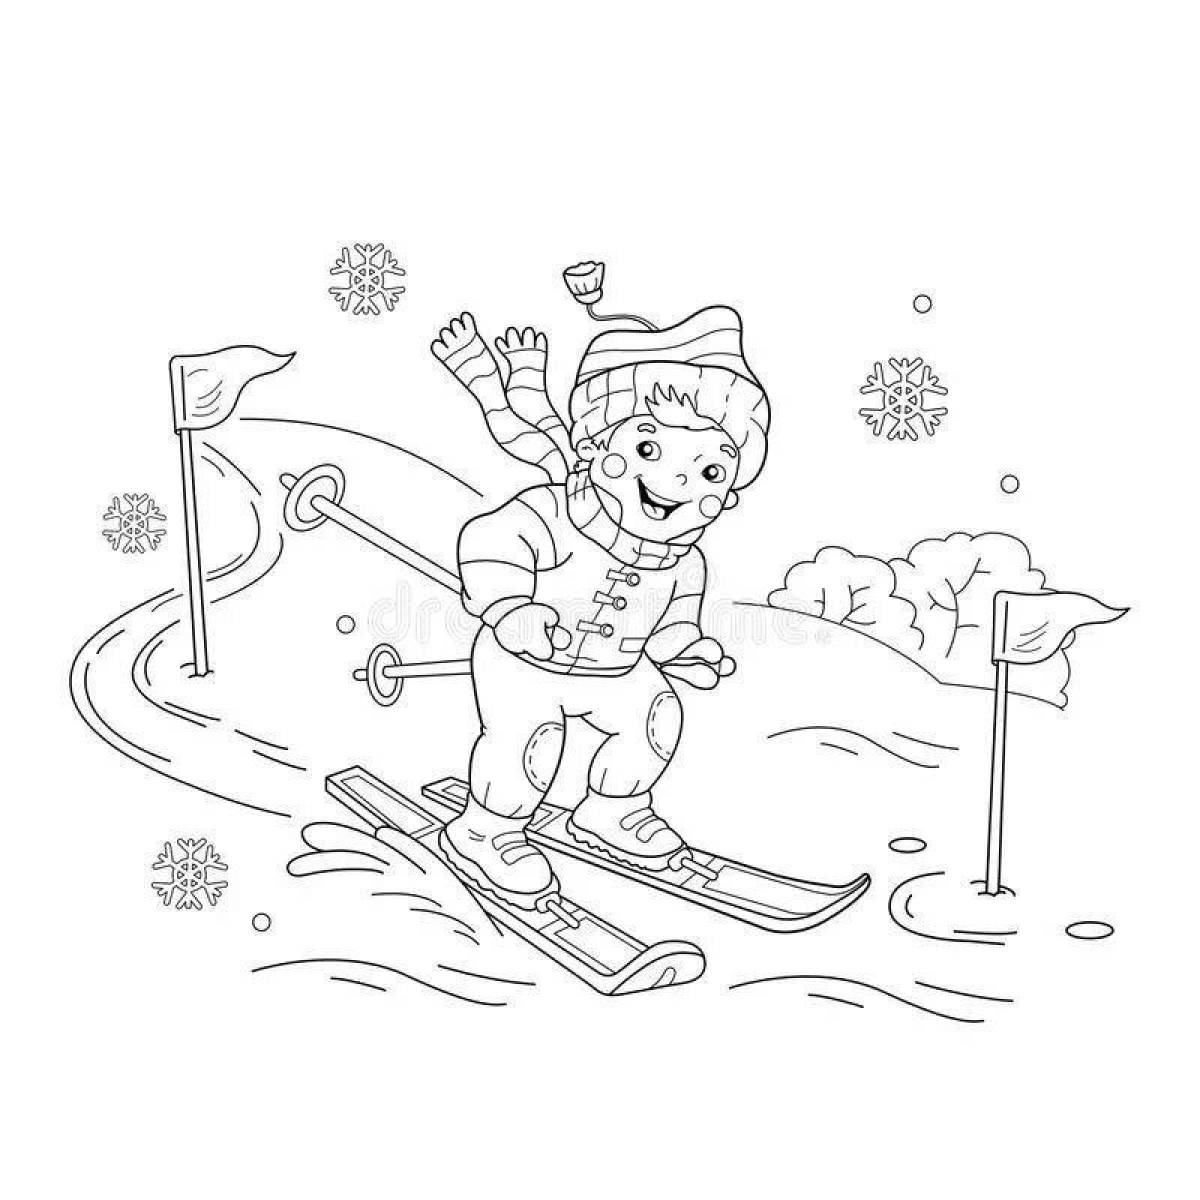 Sparkling winter sports coloring book for 4-5 year olds